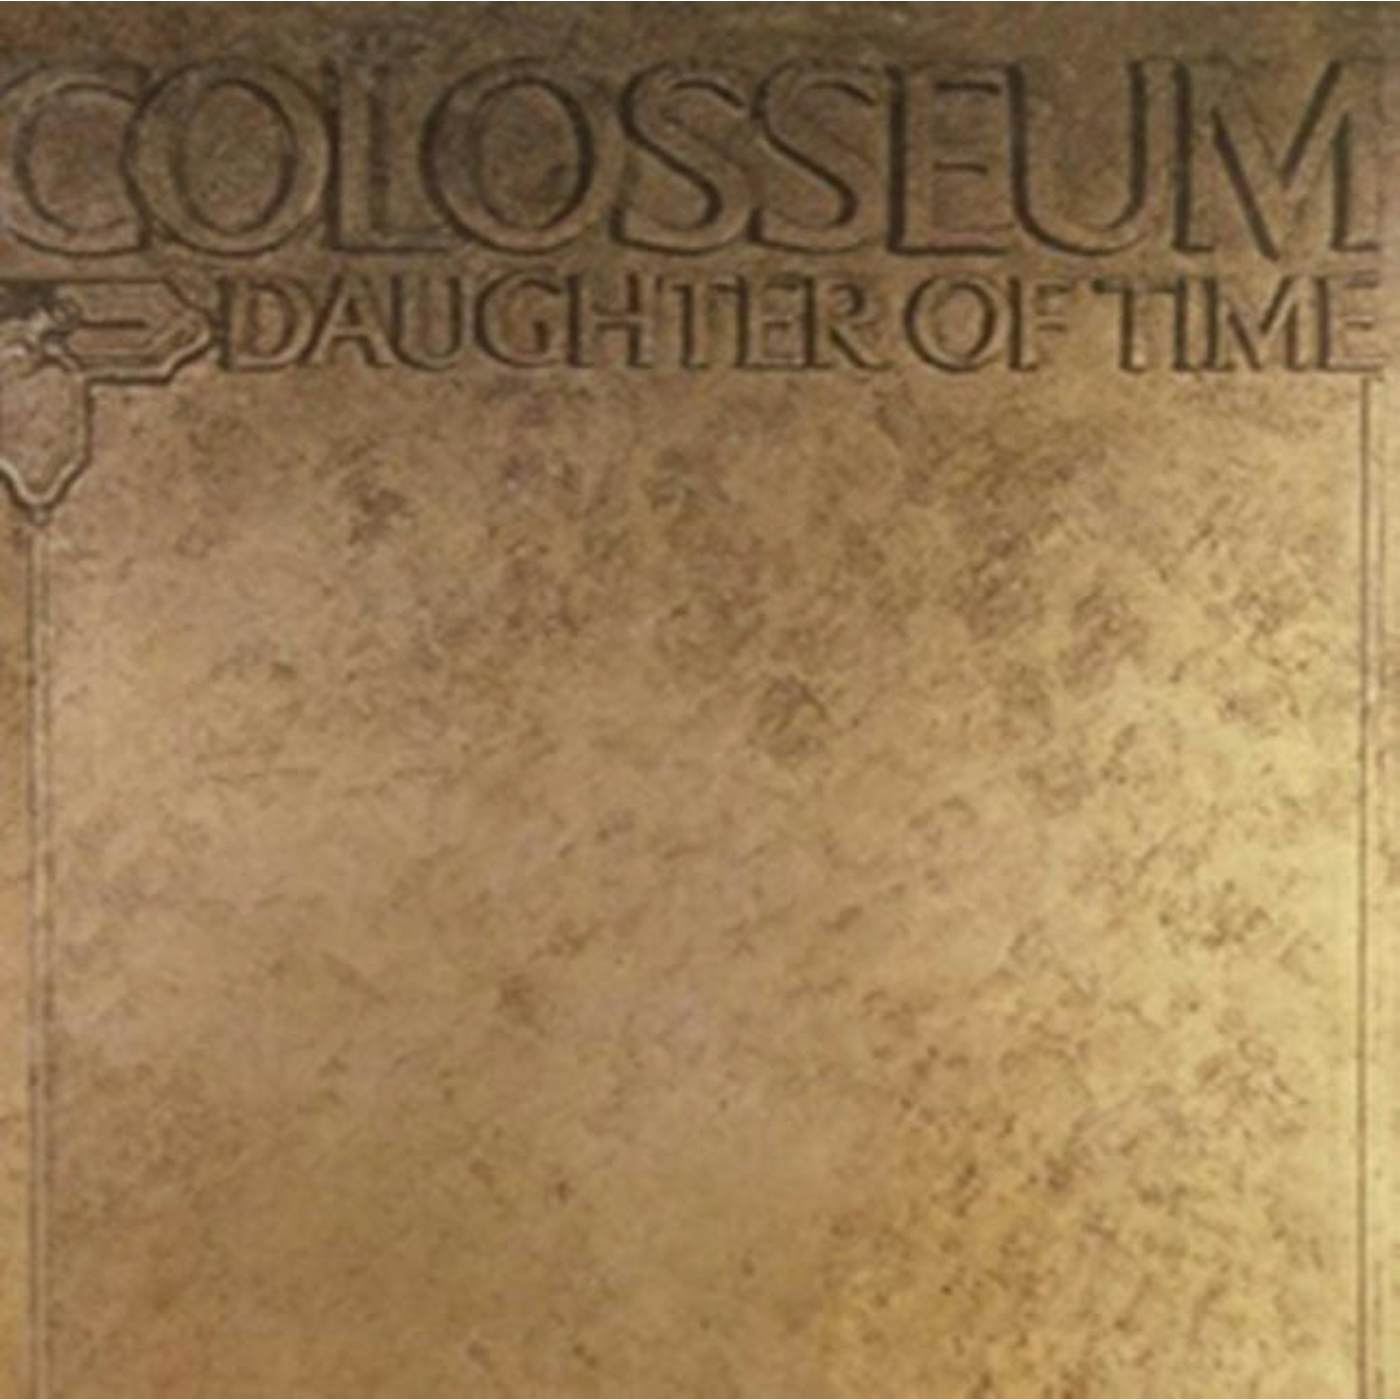 Colosseum CD - Daughter Of Time: Remastered & Expanded Edition